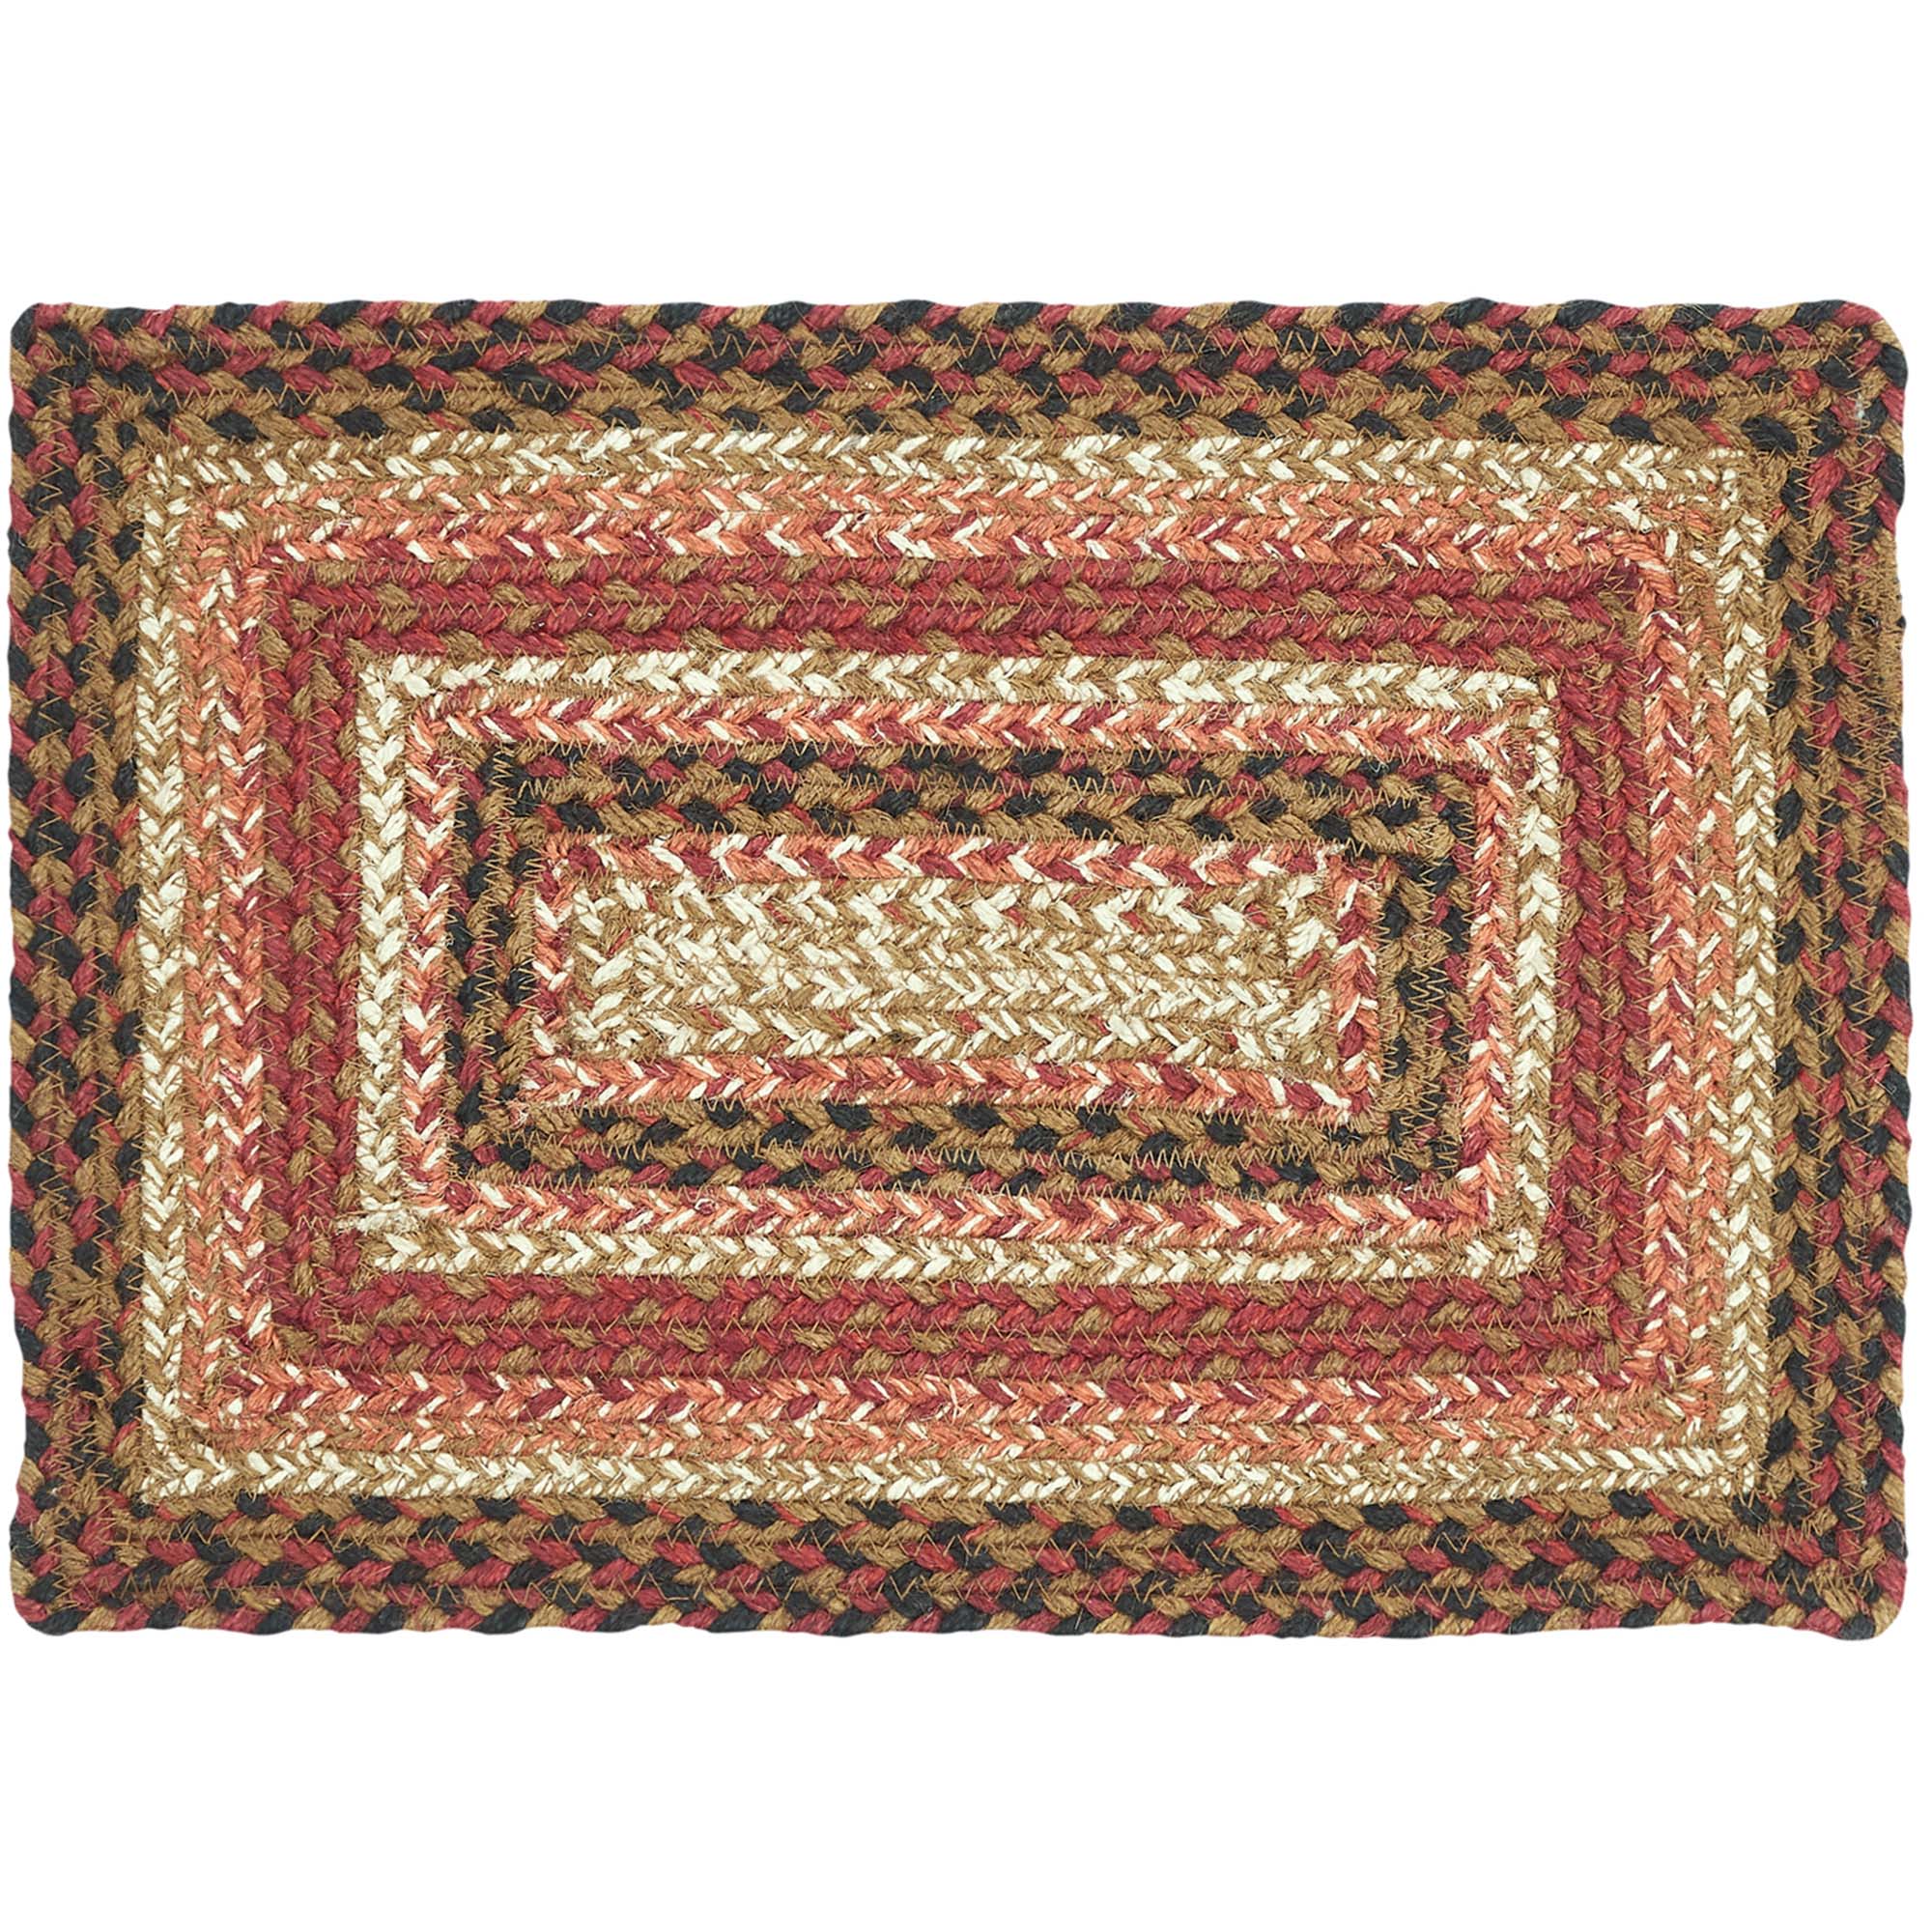 Ginger Spice Jute Braided Rect Placemat 10"x15" VHC Brands